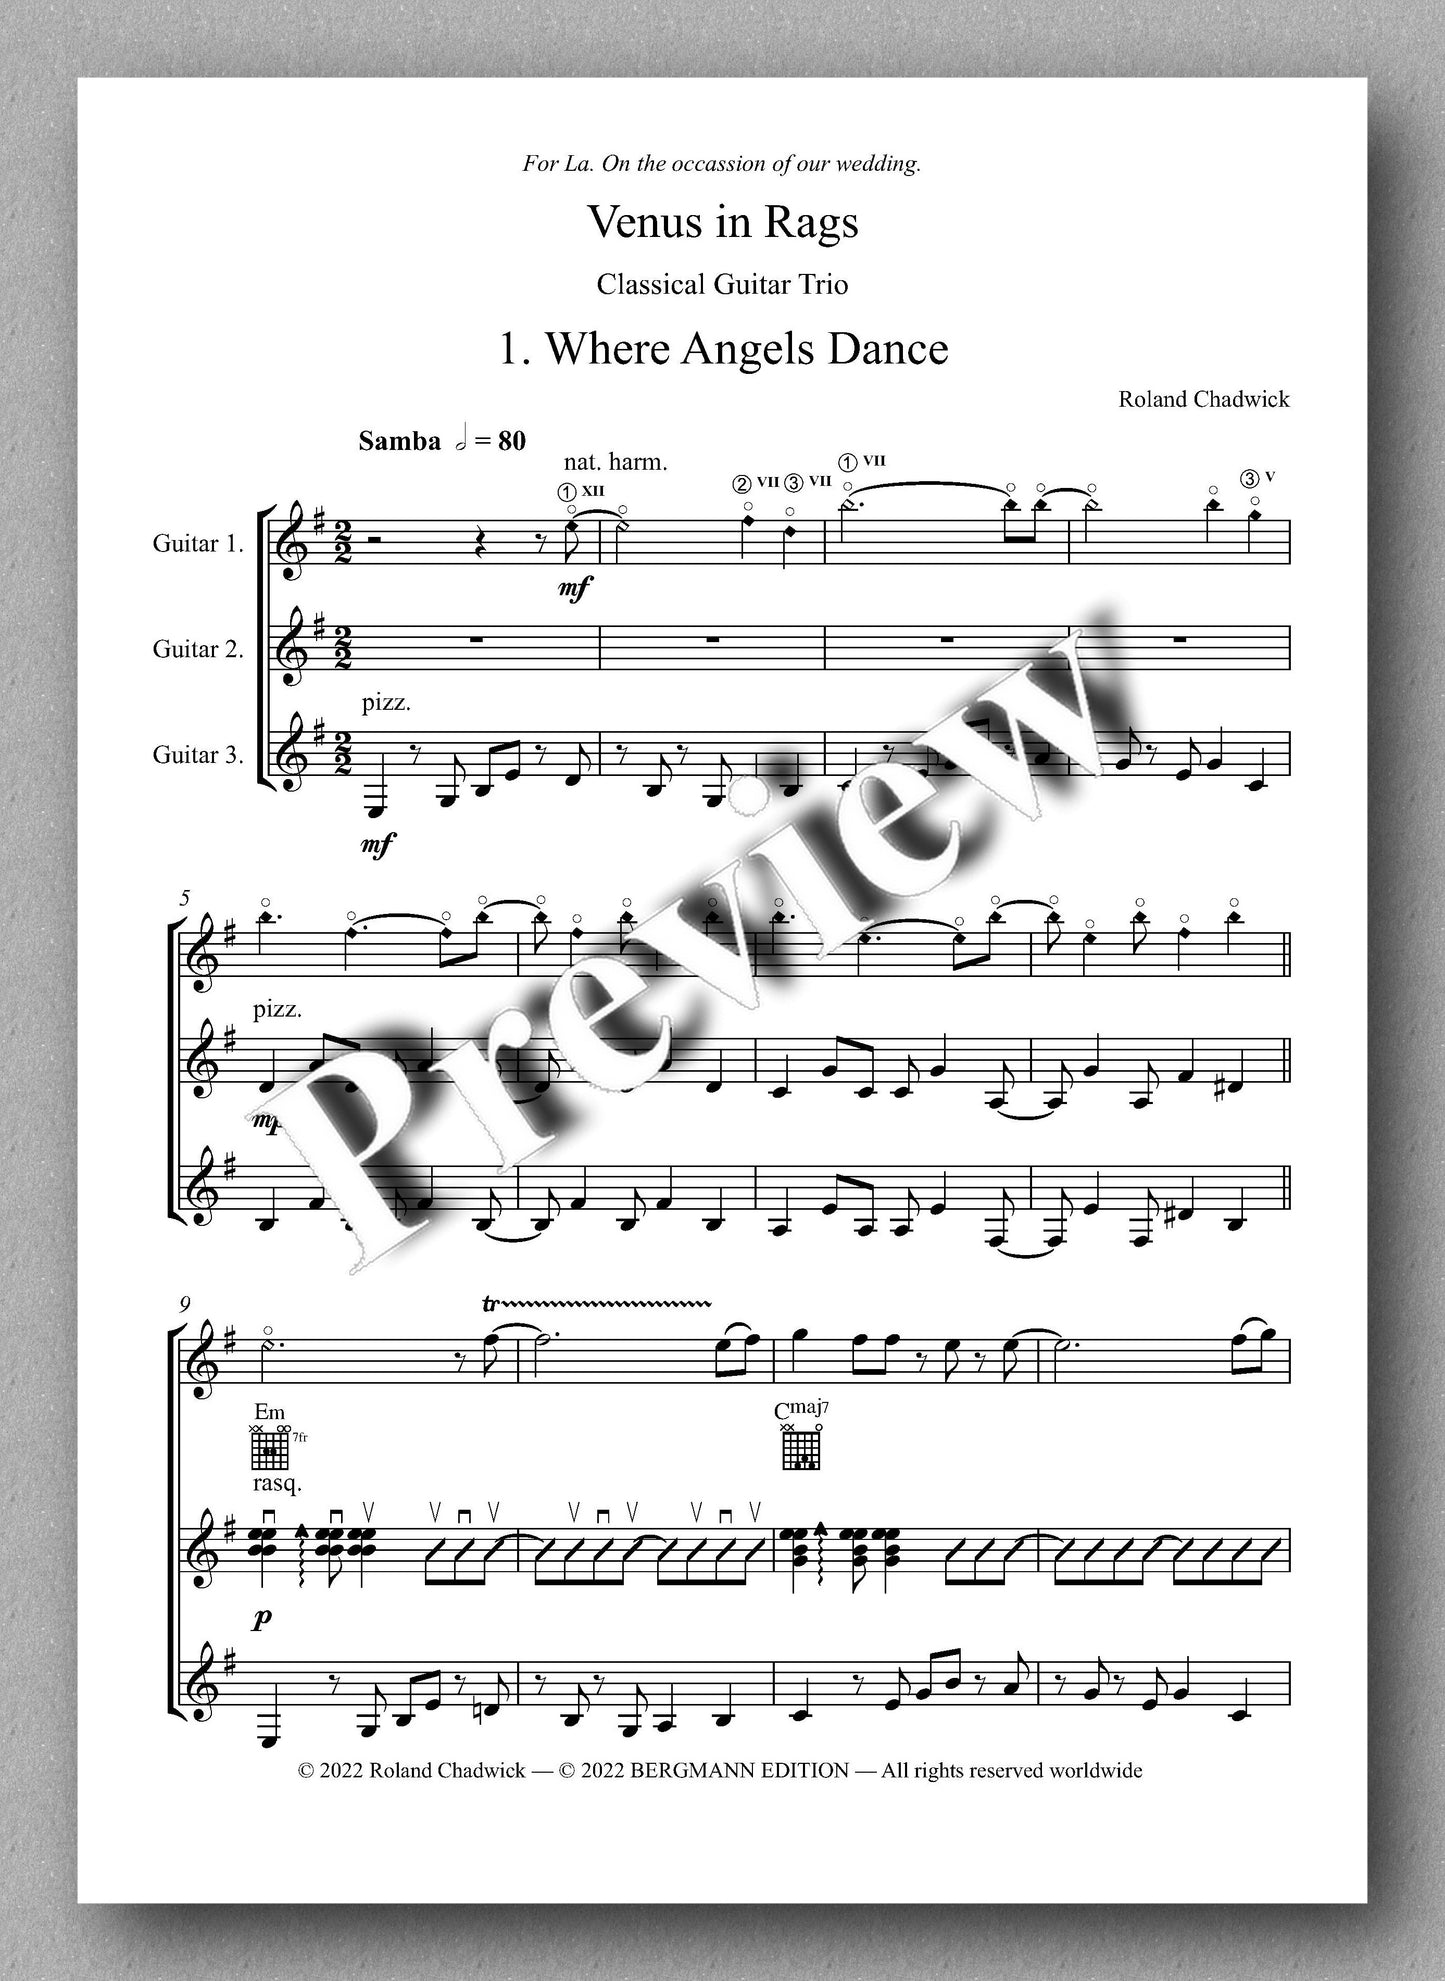 Roland Chadwick, Venus in Rags - preview of the music score 1